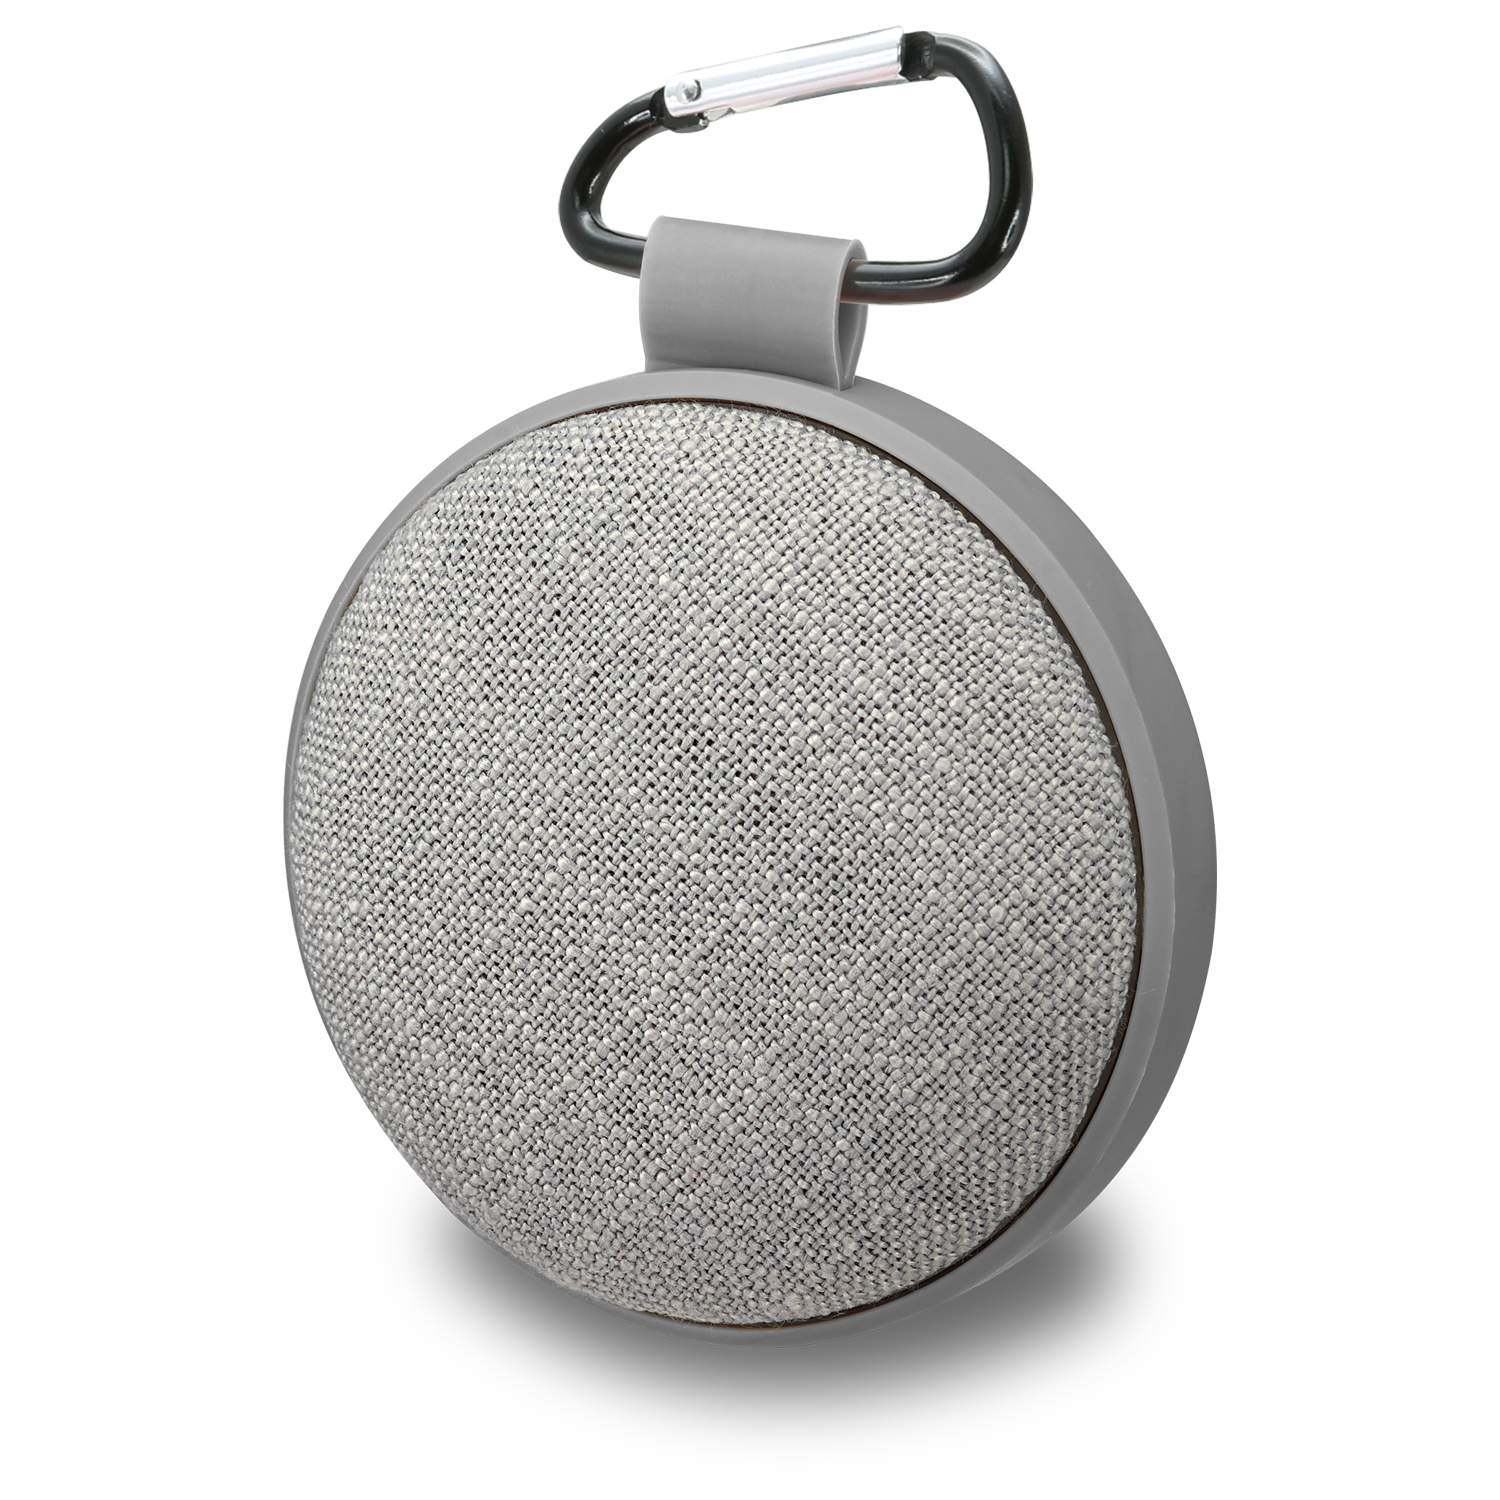 iLive Water Resistant Wireless Fabric Speaker, ISBW8, Multiple Colors - image 1 of 4